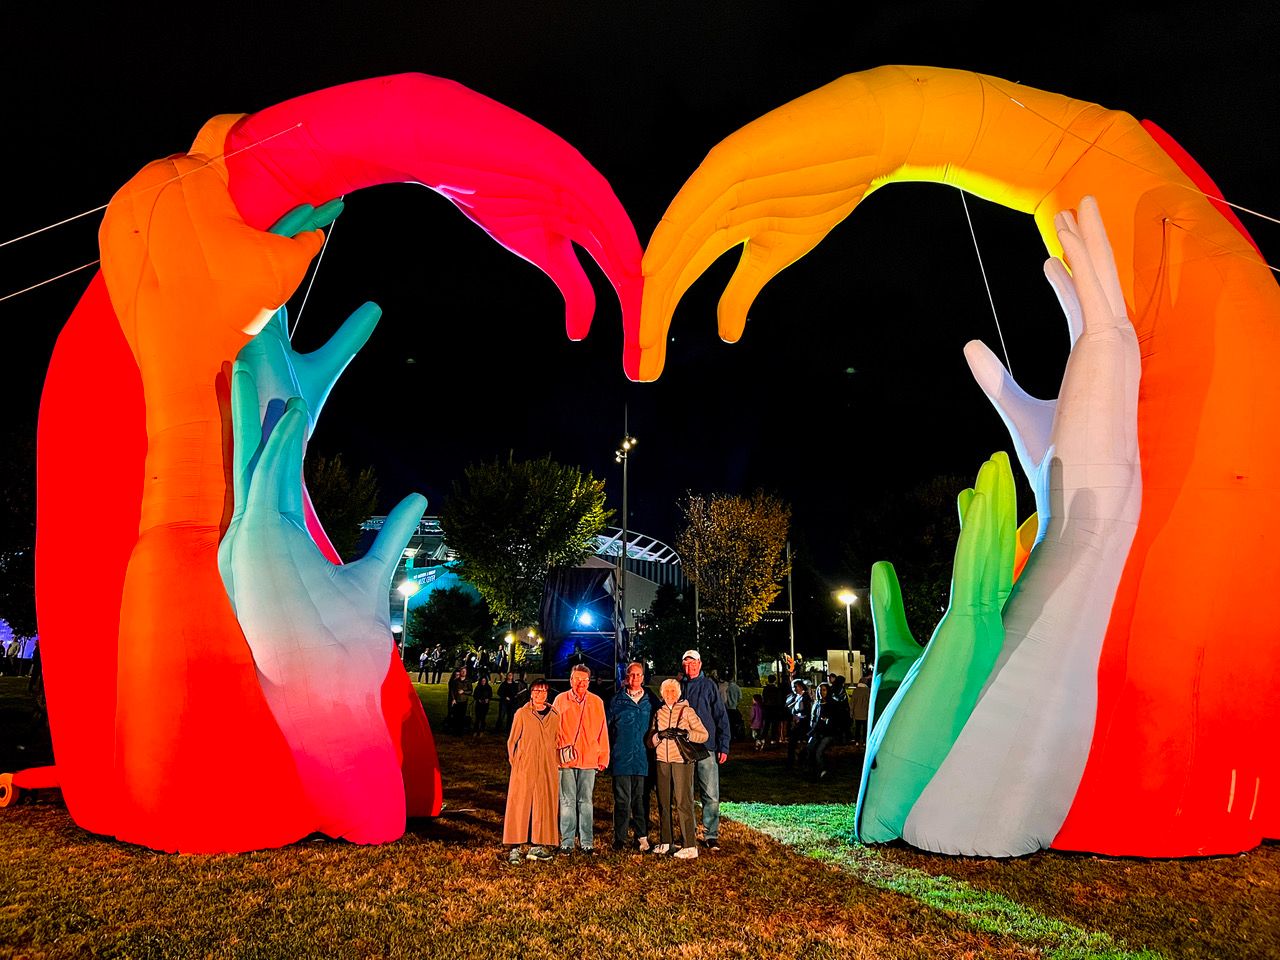 An installation set up at Smale Riverfront Park in Cincinnati during BLINK 2022. (Photo courtesy of Maple Knoll Village)